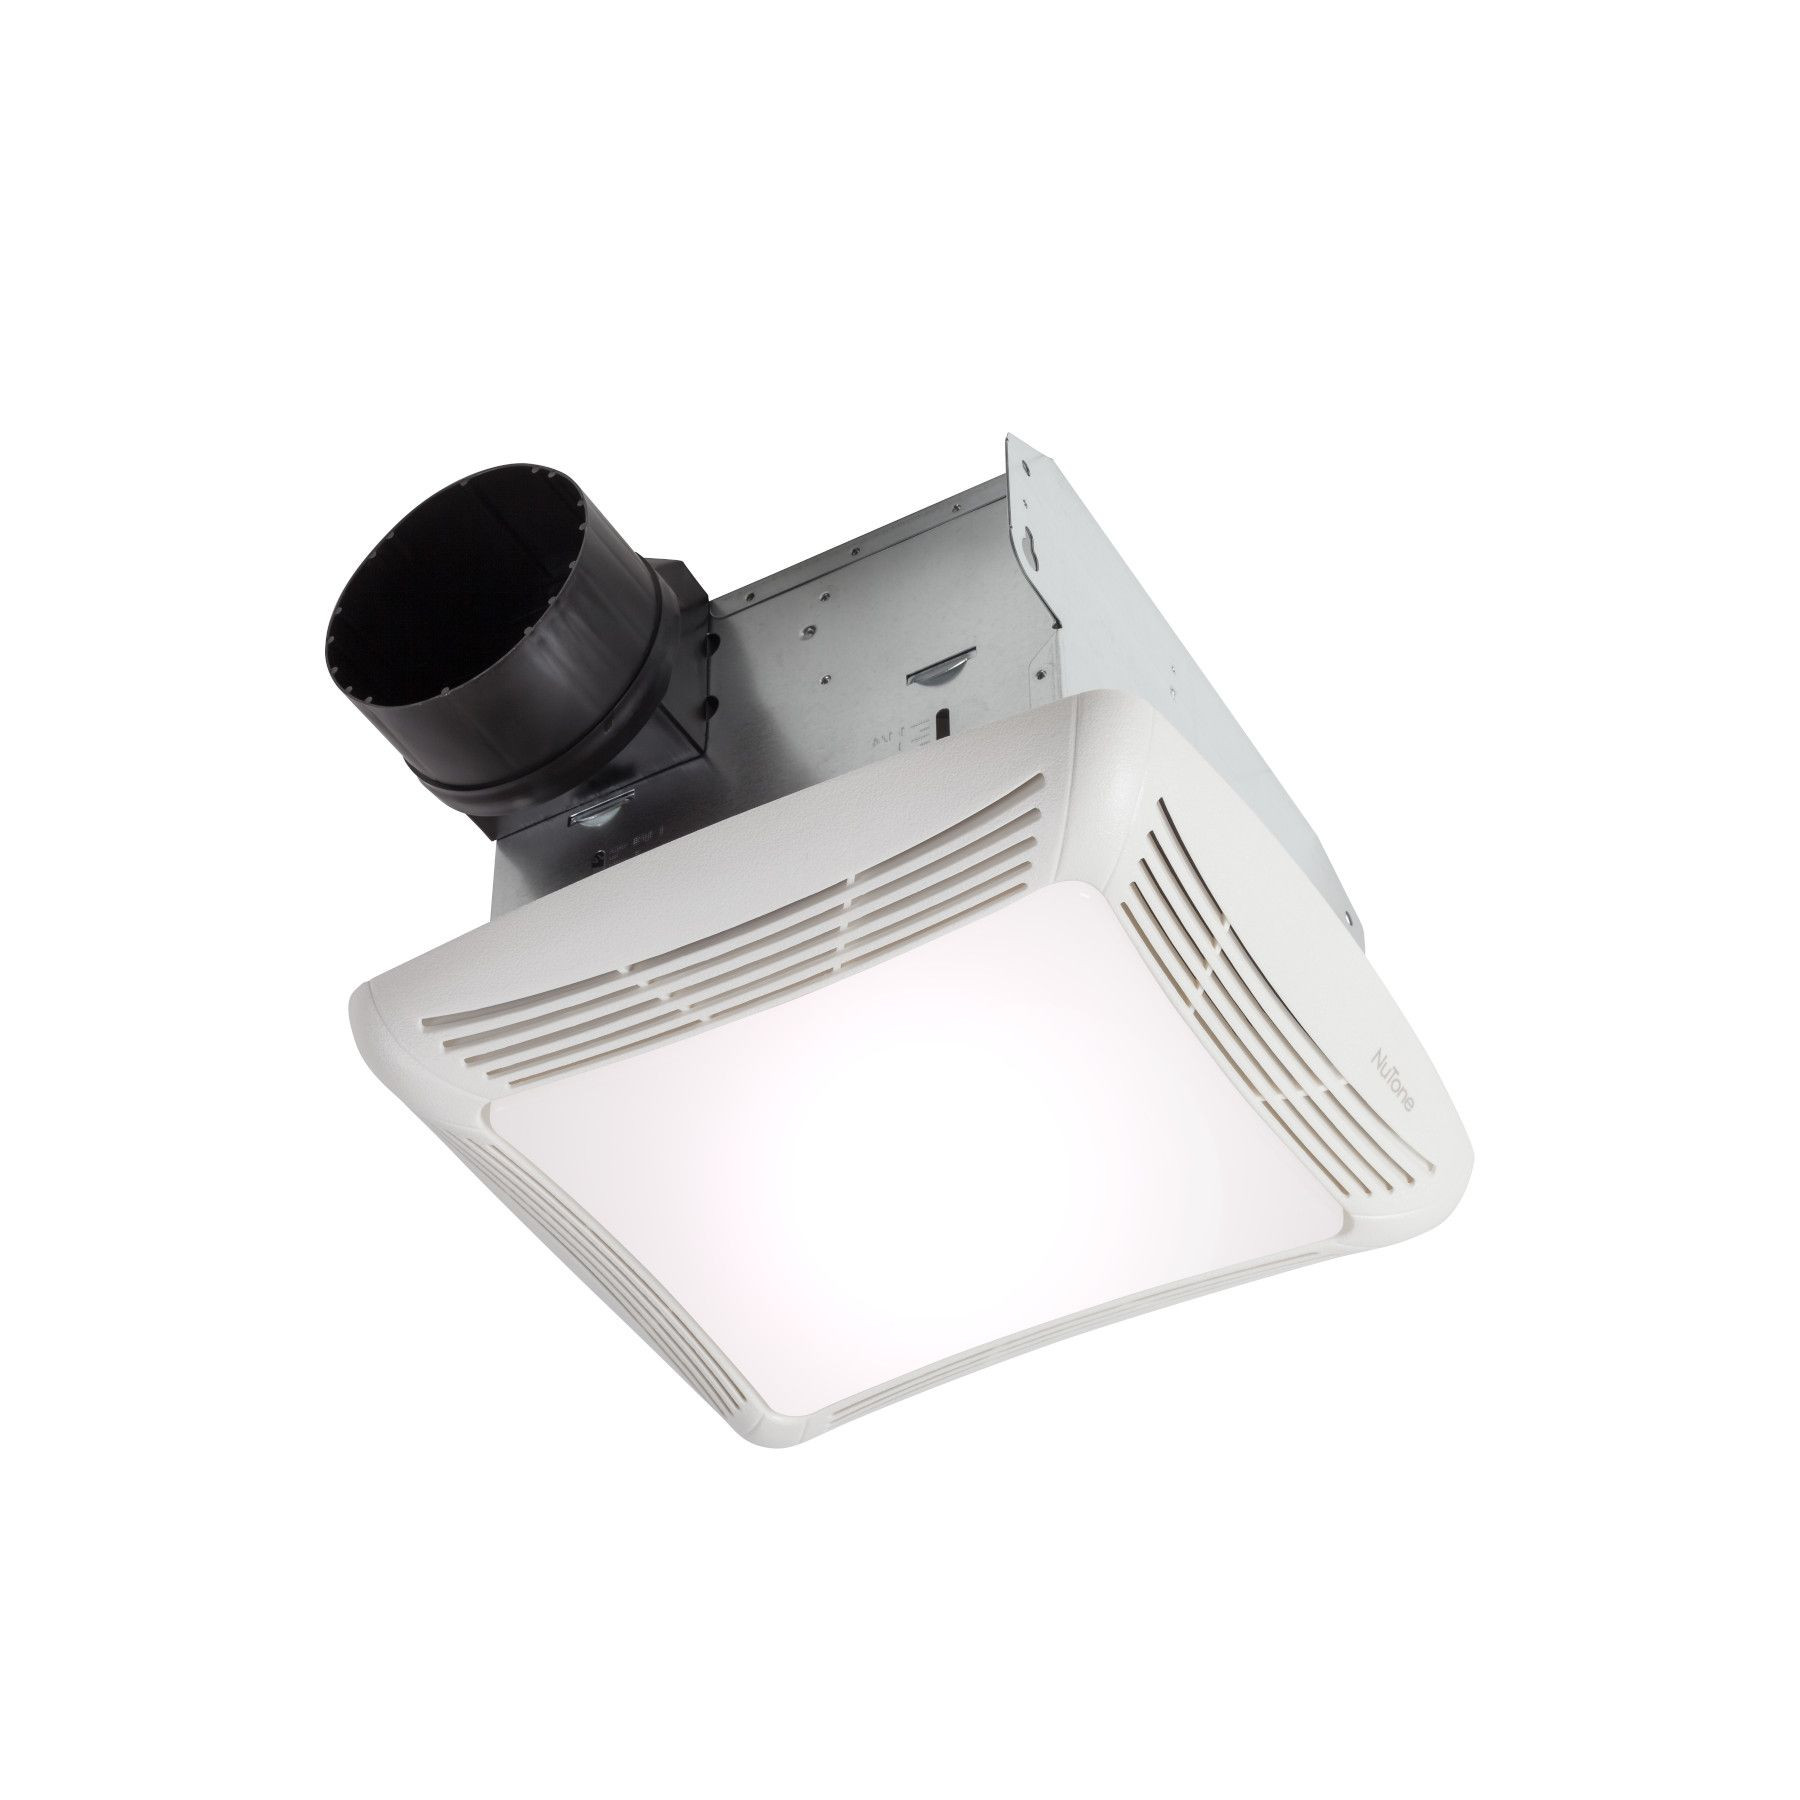 Bathroom Exhaust Fan And Light
 HB80RL NuTone 80 CFM Ventilation Fan with Interchangeable